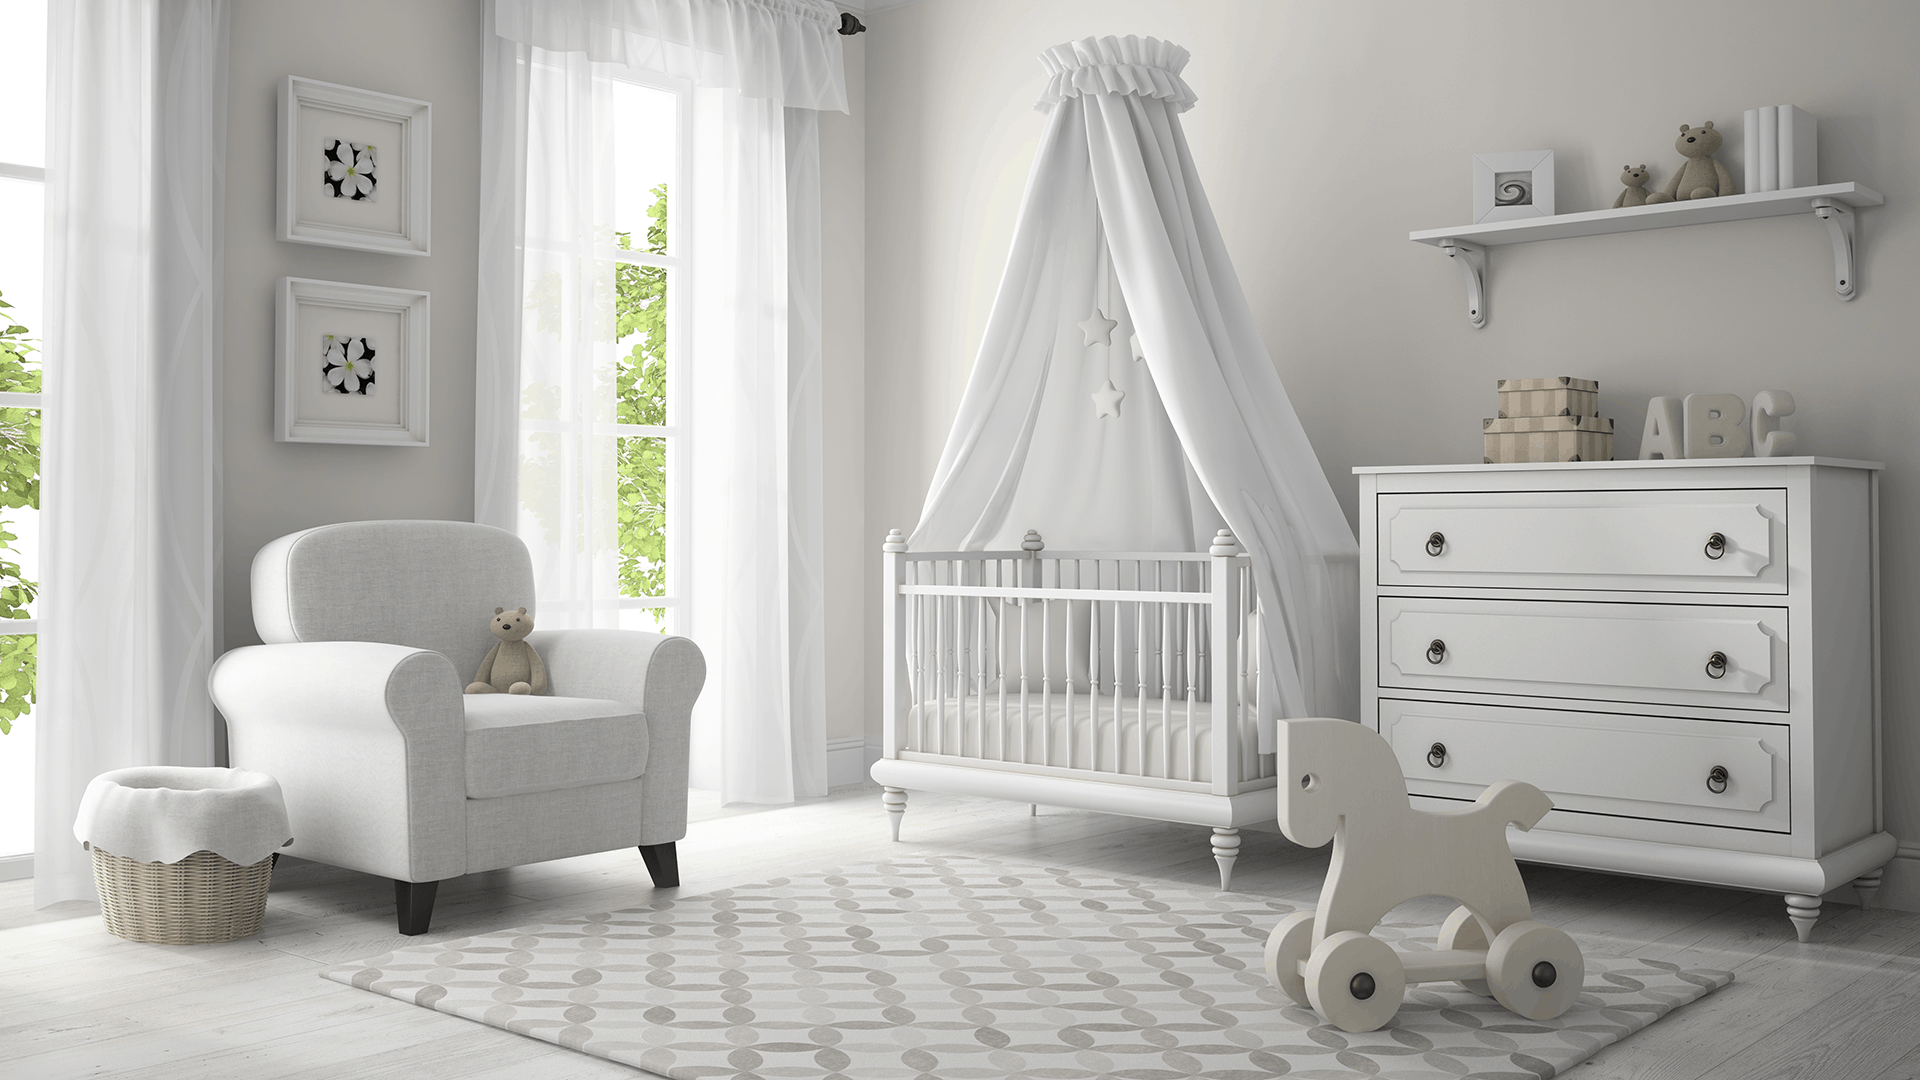 living room with baby stuff